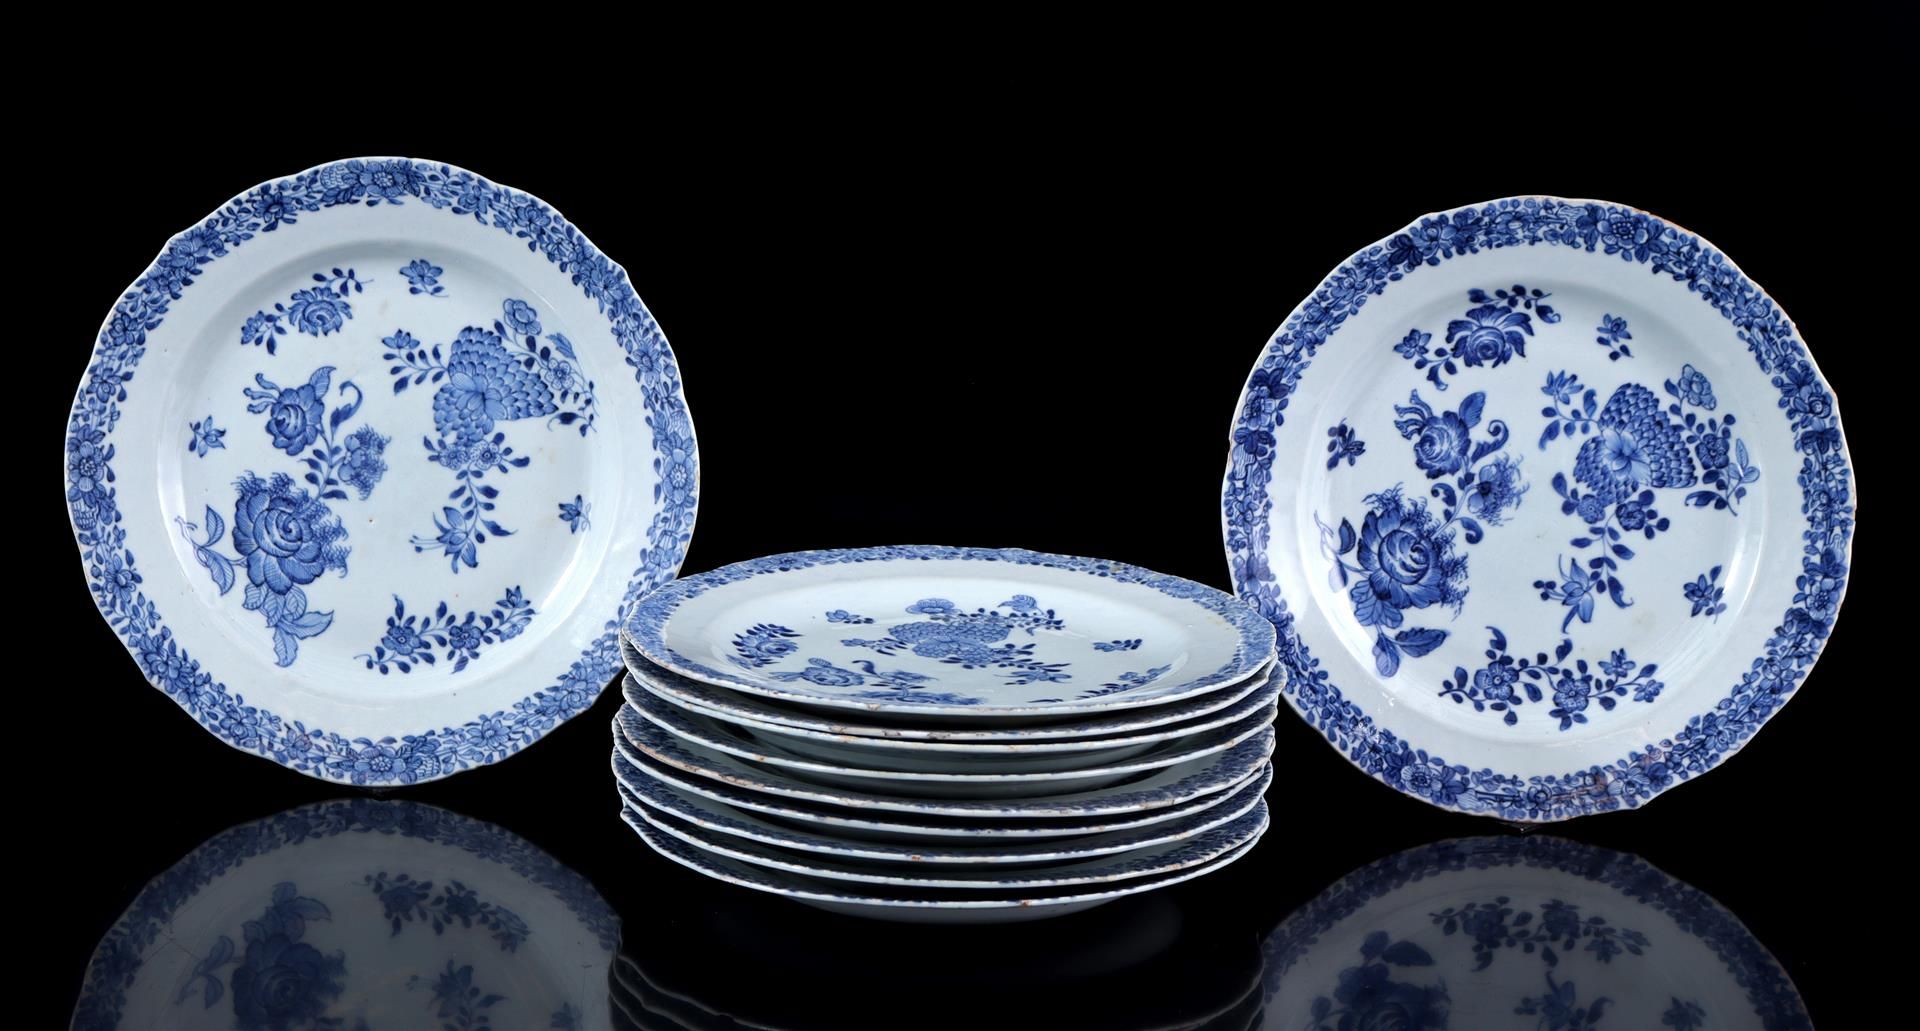 11 porcelain dishes with blue floral decor, China, ca. 1800